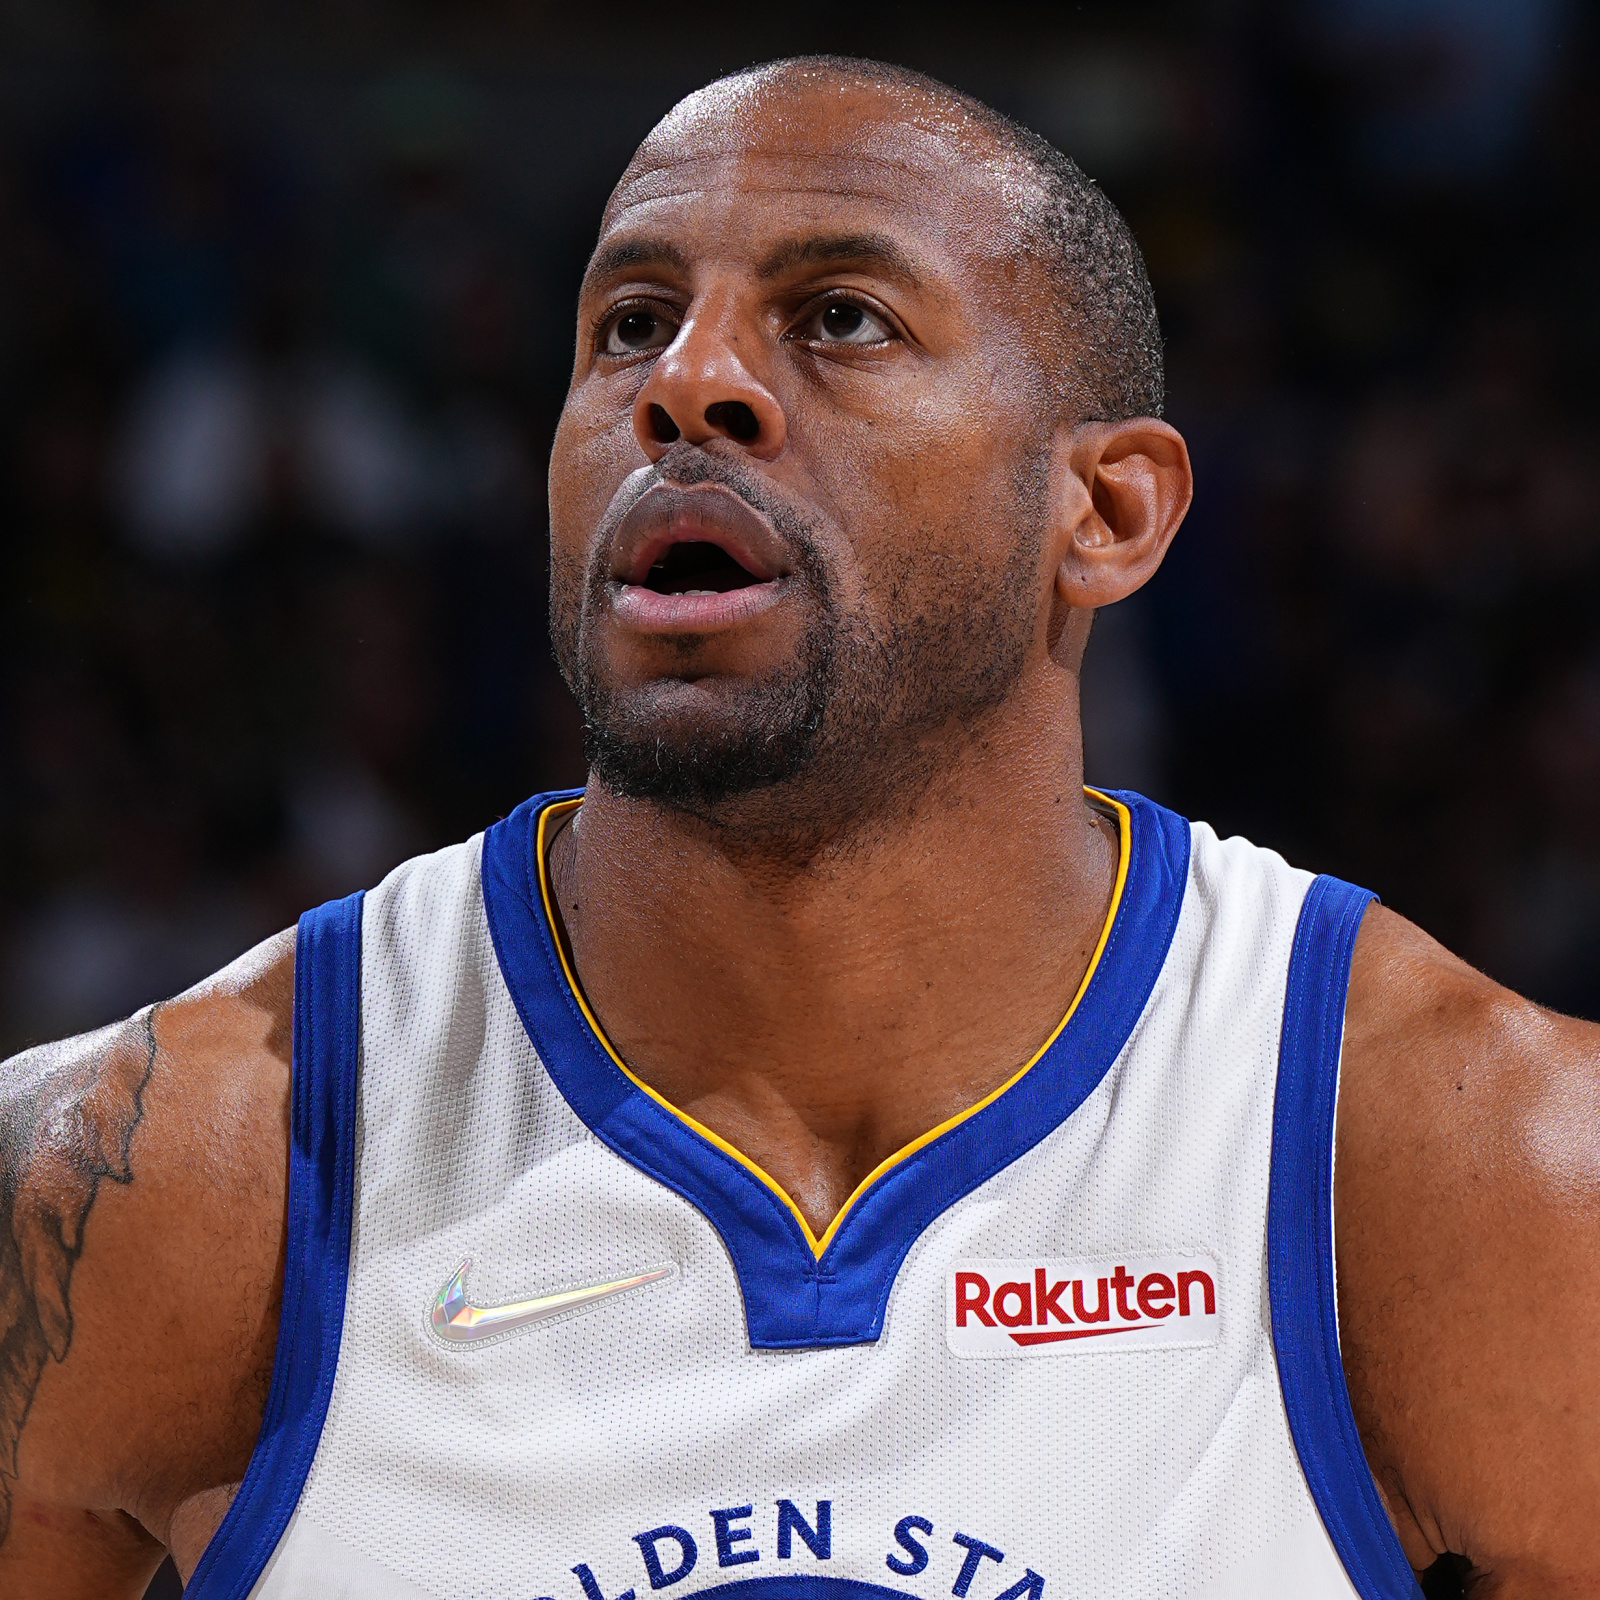 Andre Iguodala's son nearly cried when he told him he might leave Warriors  – East Bay Times